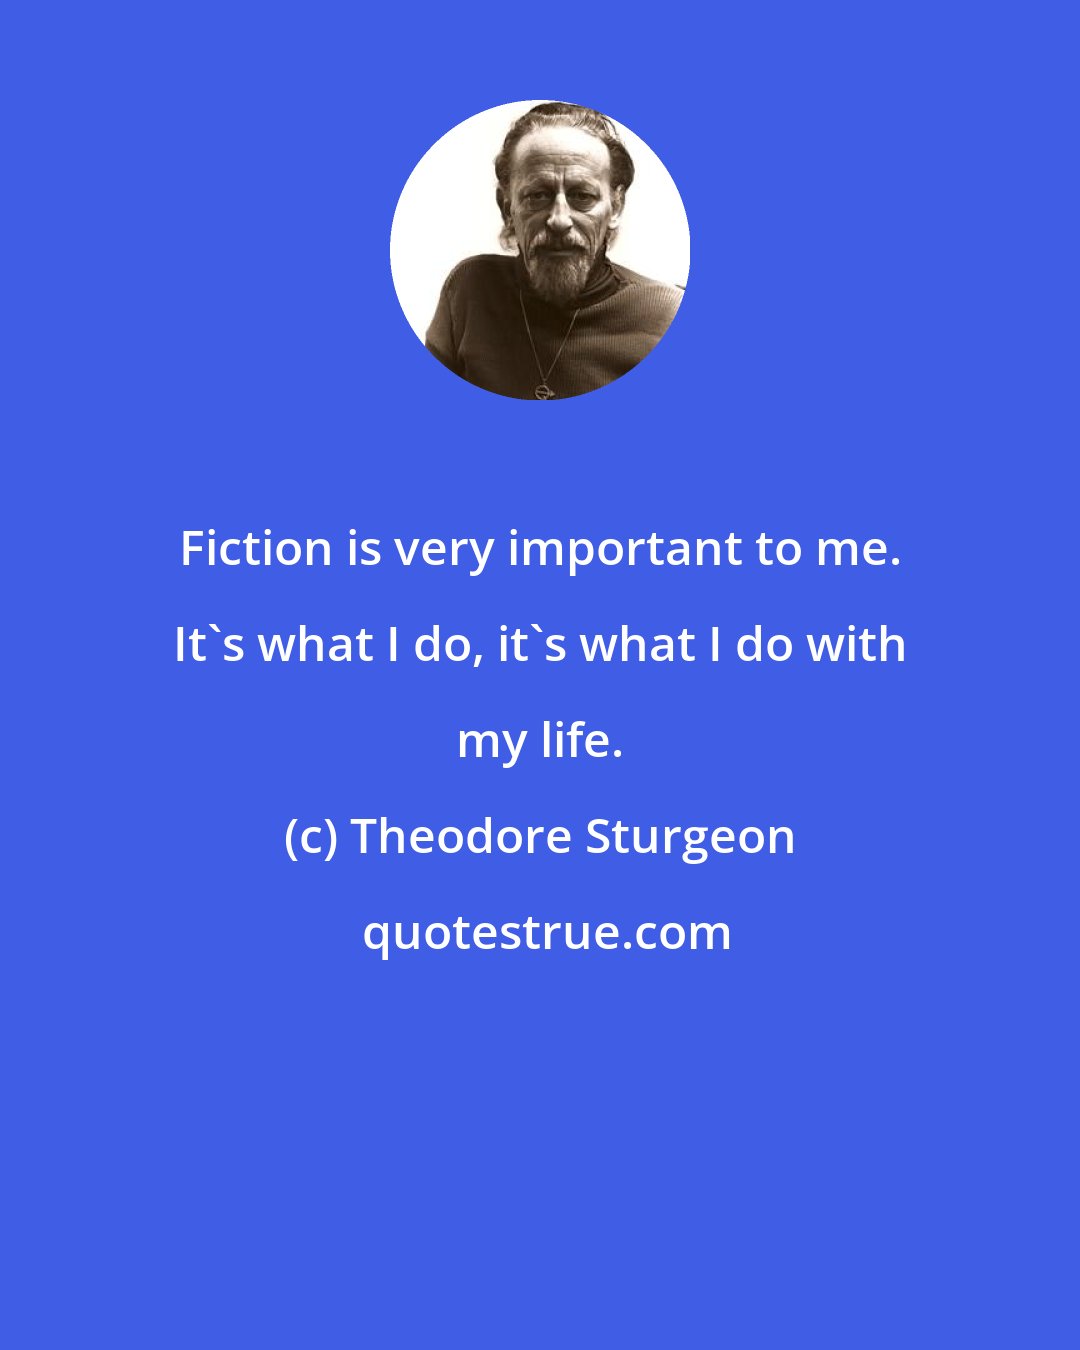 Theodore Sturgeon: Fiction is very important to me. It's what I do, it's what I do with my life.